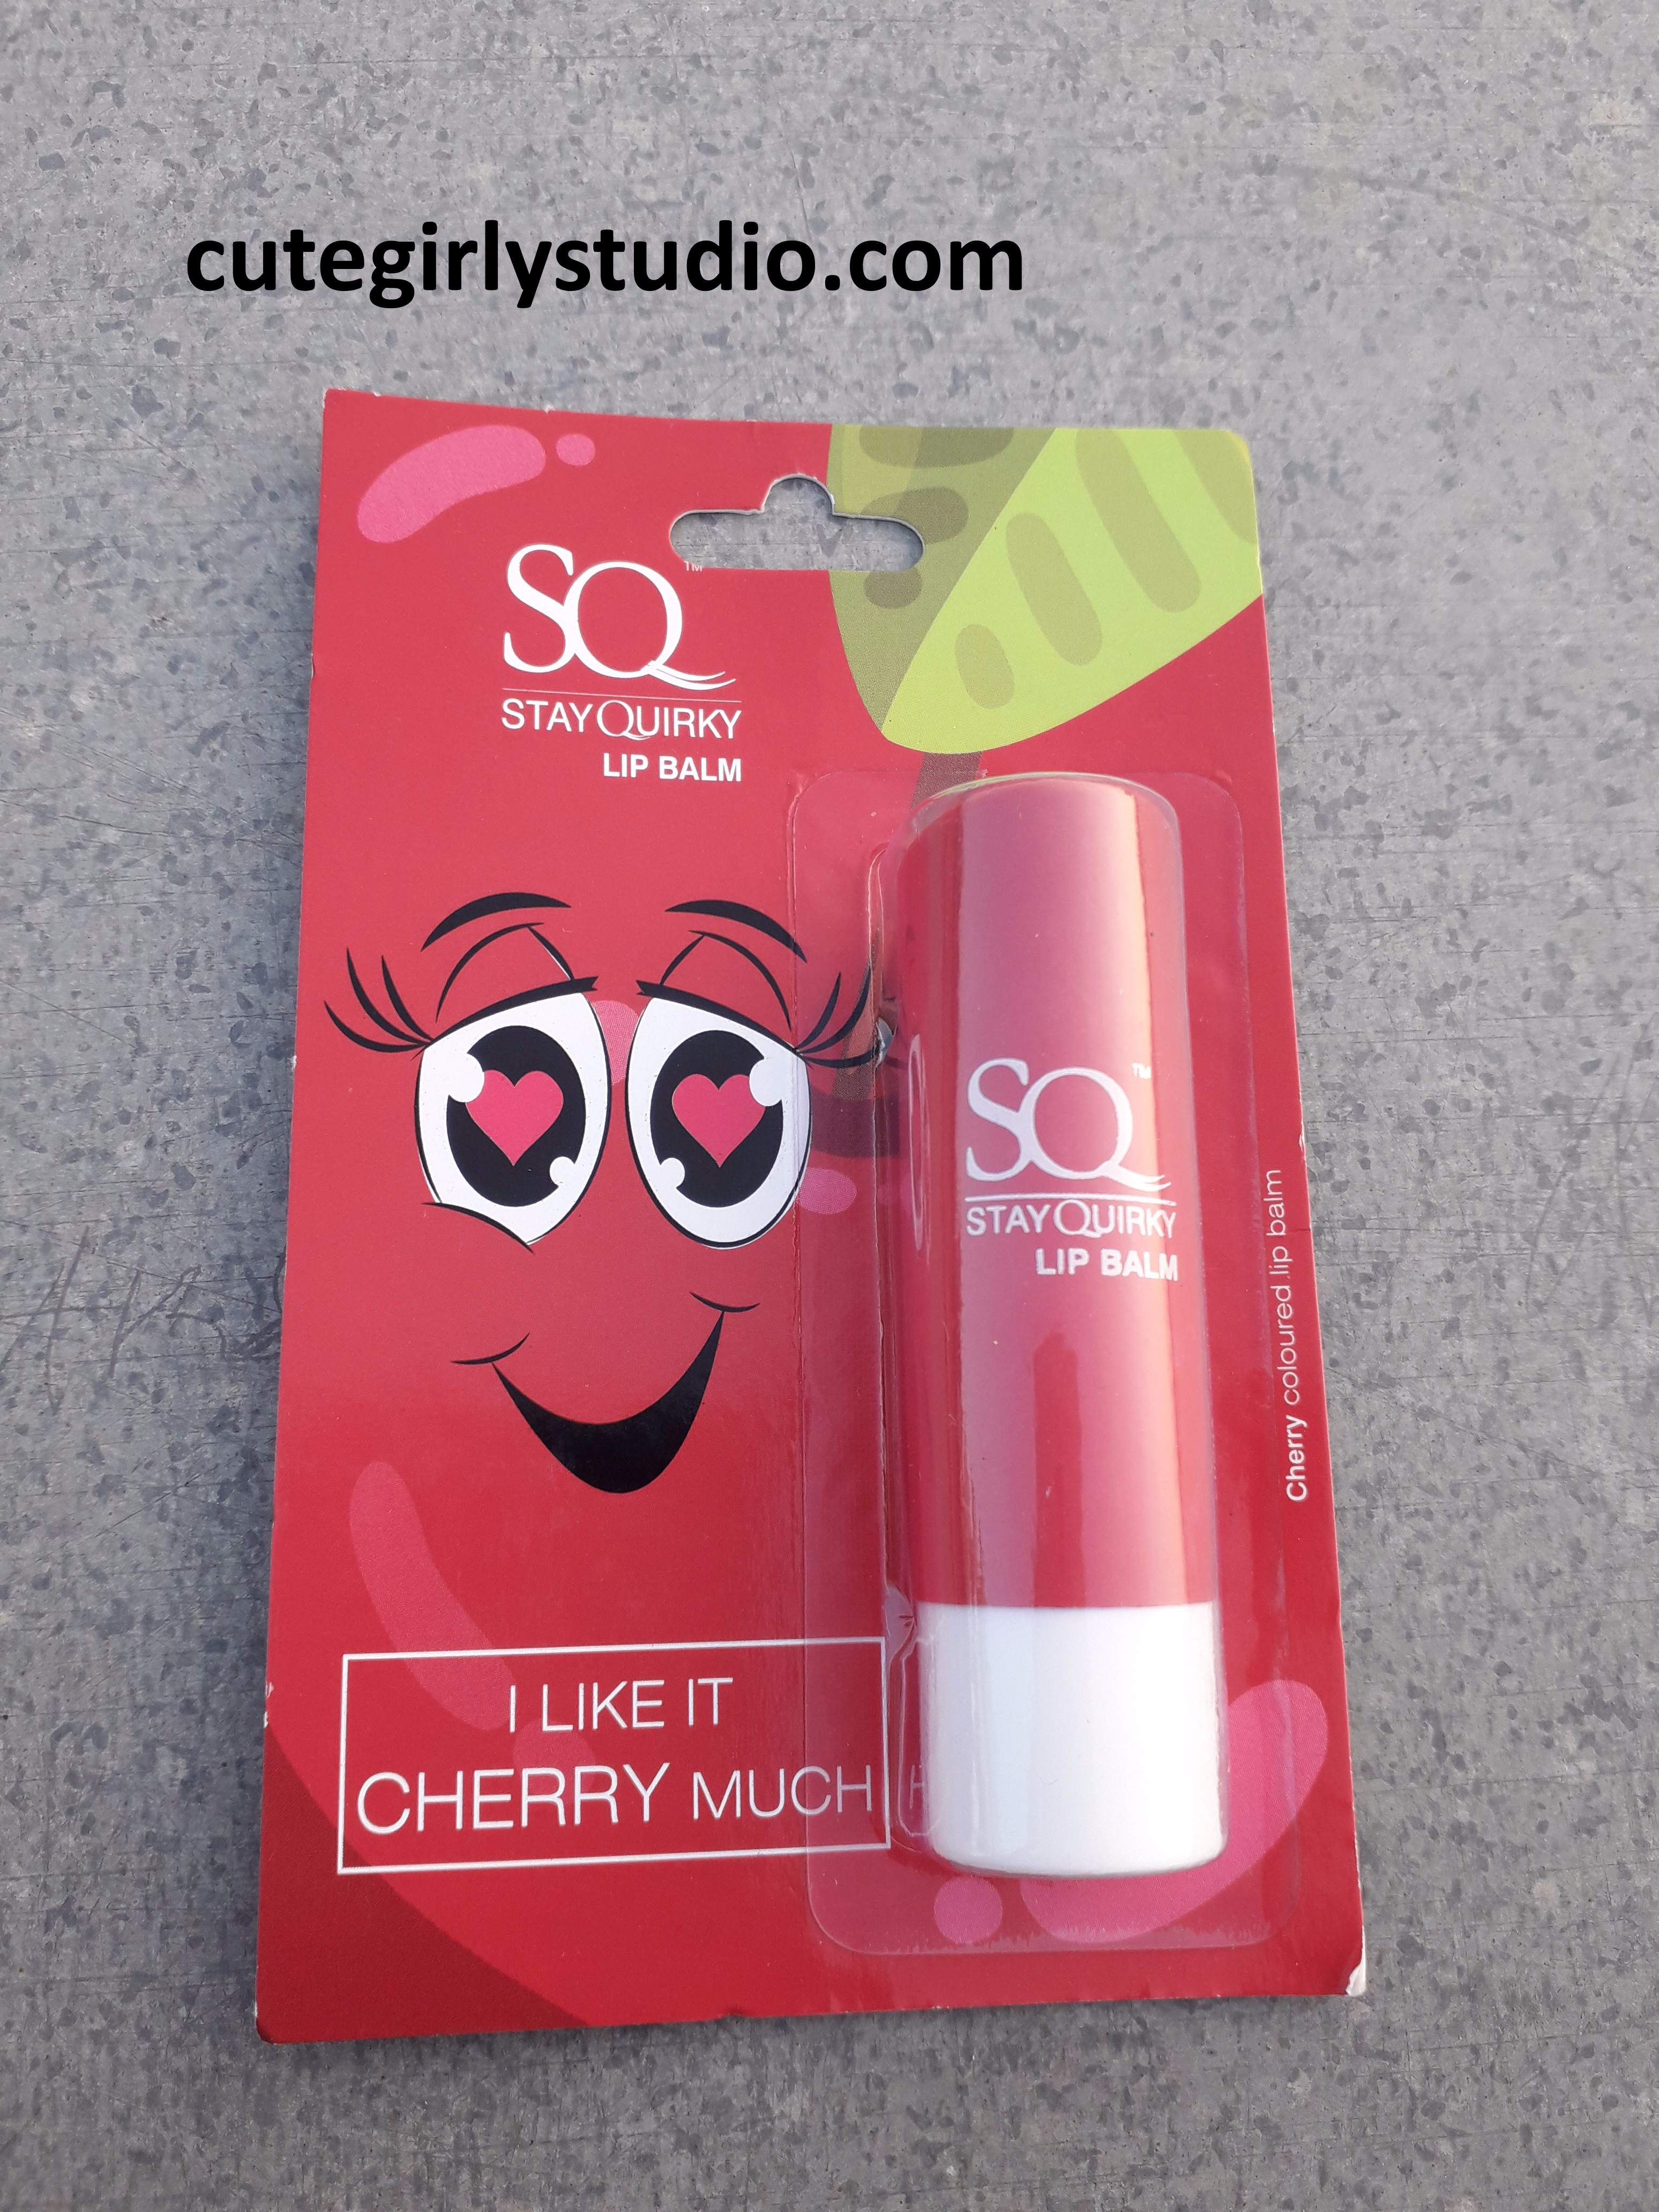 Stay Quirky lip balm review - I like it cherry much